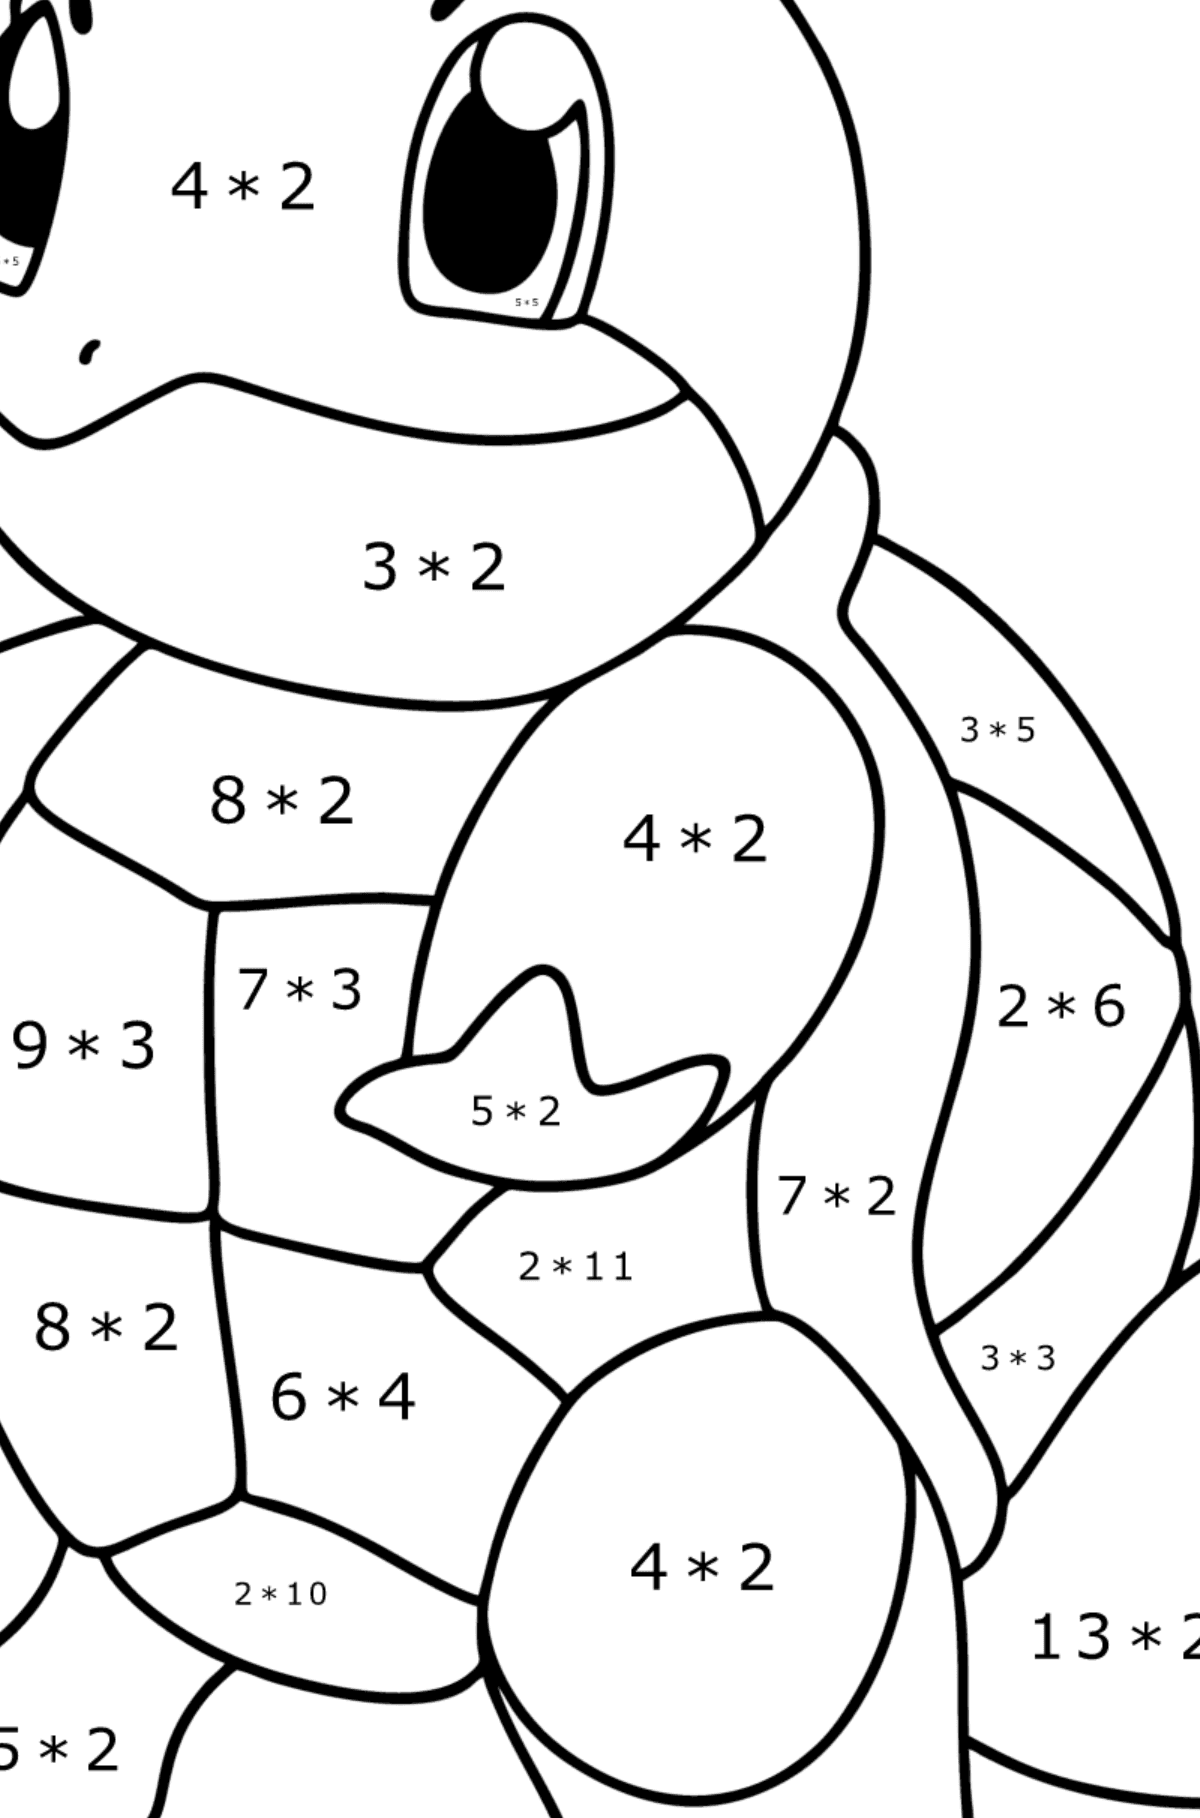 Coloring page Pokémon Go Squirtle - Math Coloring - Multiplication for Kids